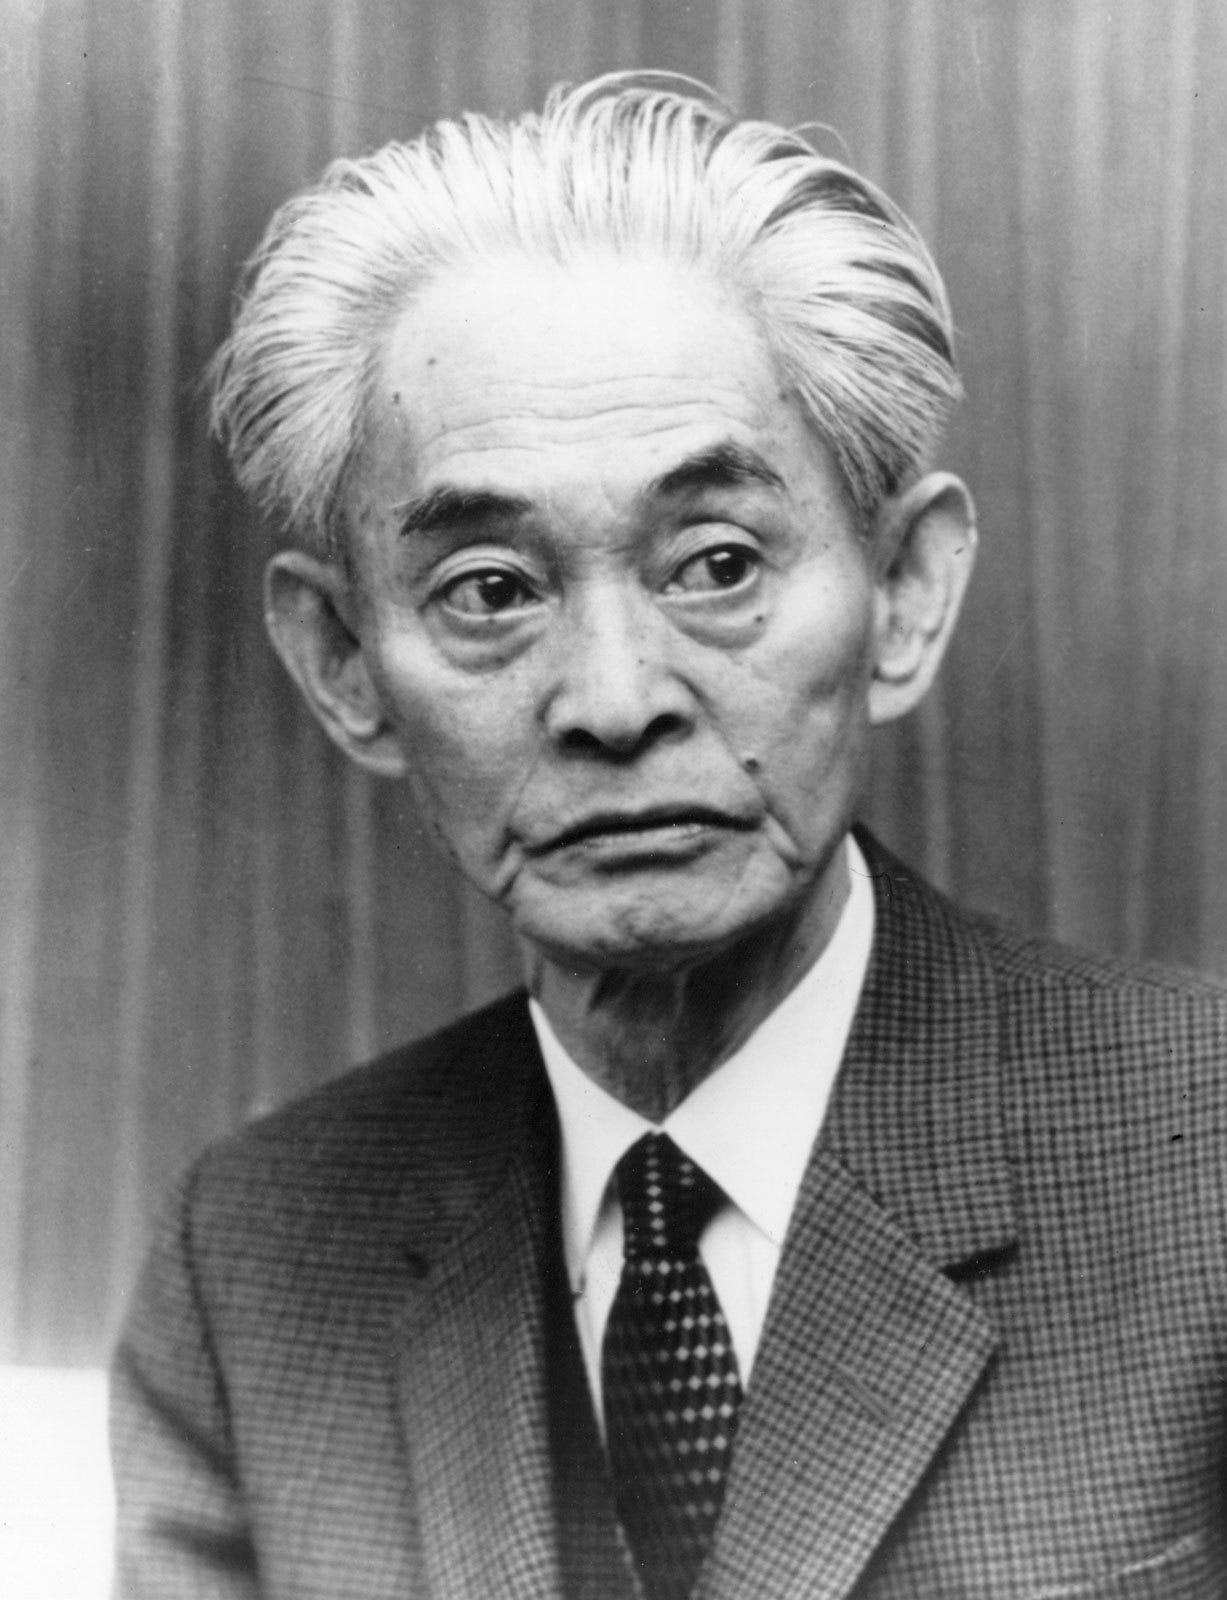 Yasunari Kawabata
Time passed. But time flows in many streams. Like a river, an inner stream of time will flow rapidly at some places and sluggishly at others, or perhaps even stand hopelessly stagnant. Cosmic time is the same for everyone, but human...